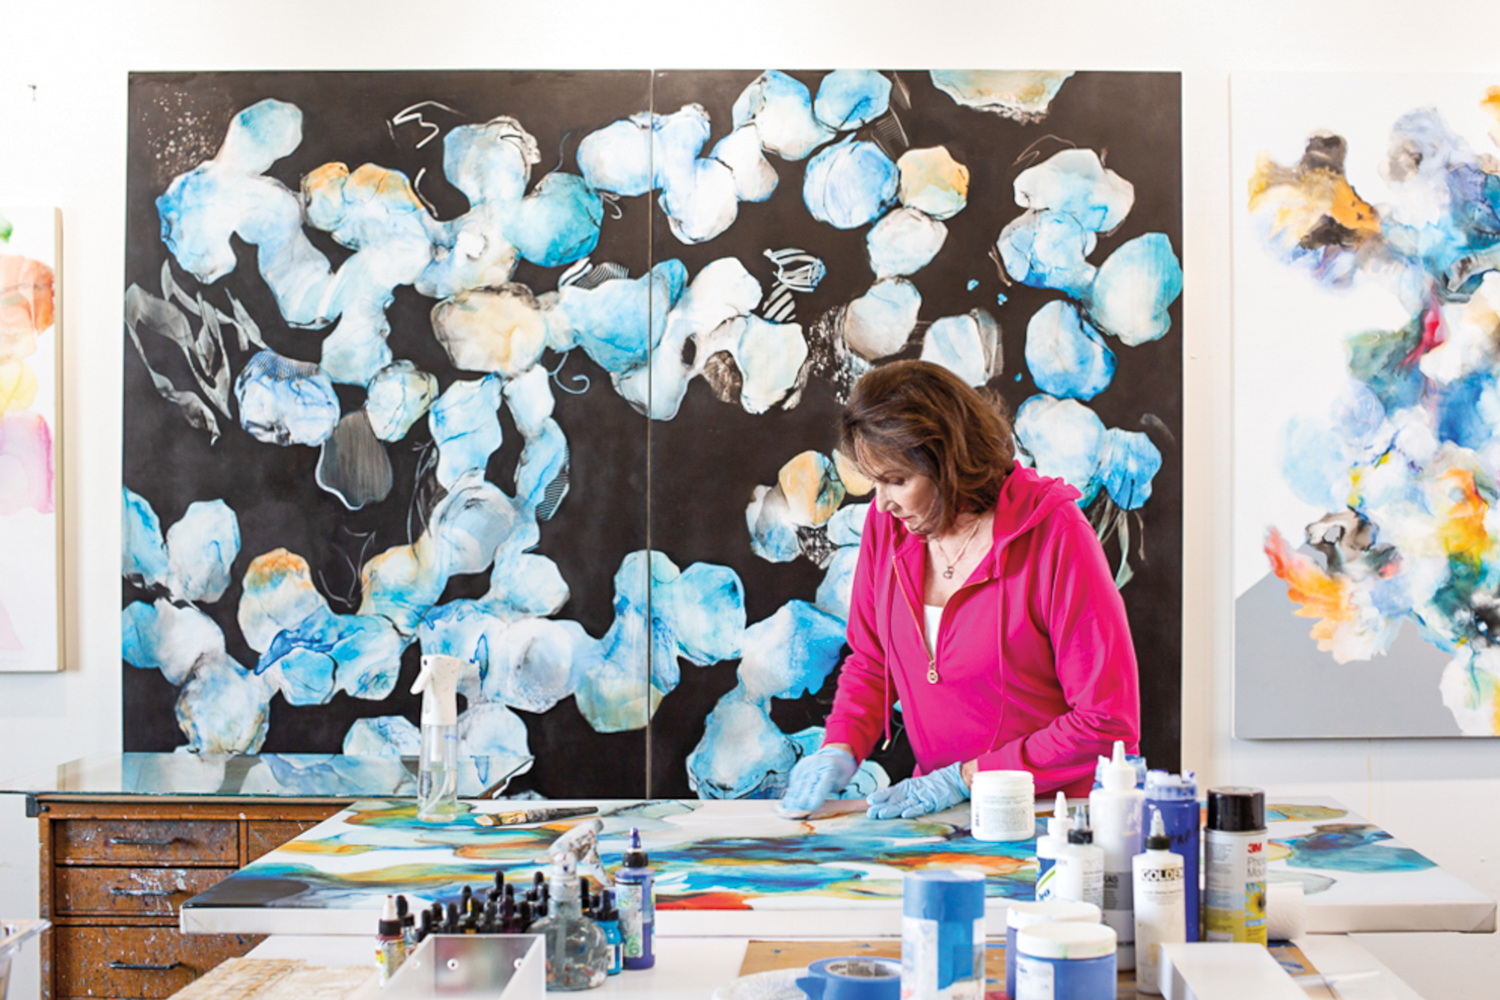 Follow Houston Abstract Artist Cookie Ashton’s Trail Of Discovery